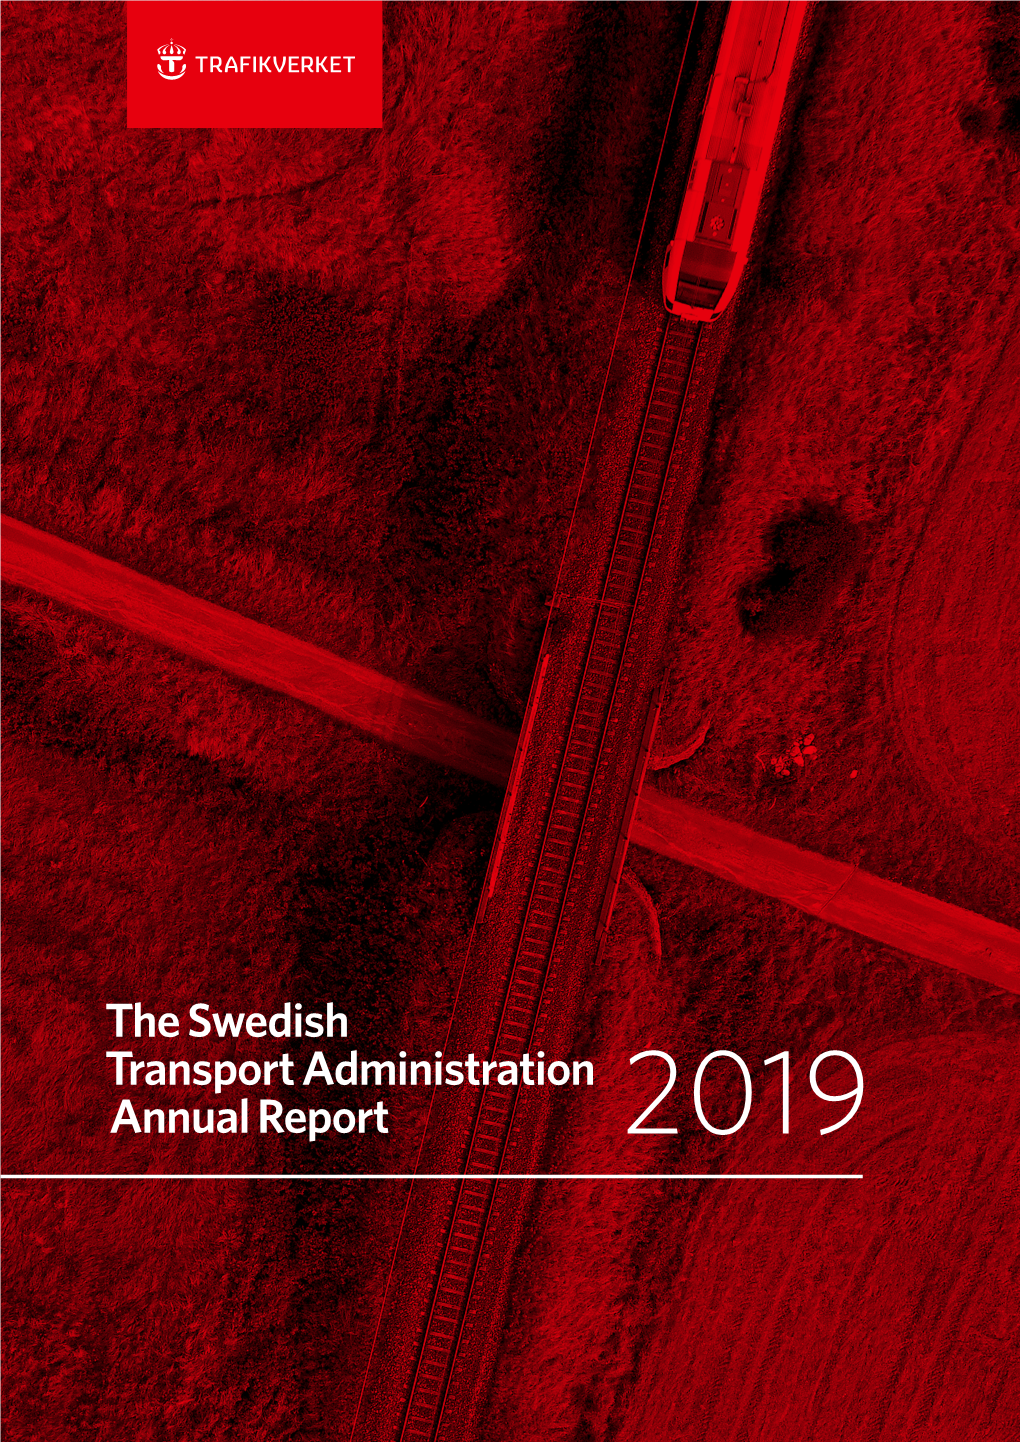 The Swedish Transport Administration Annual Report 2019